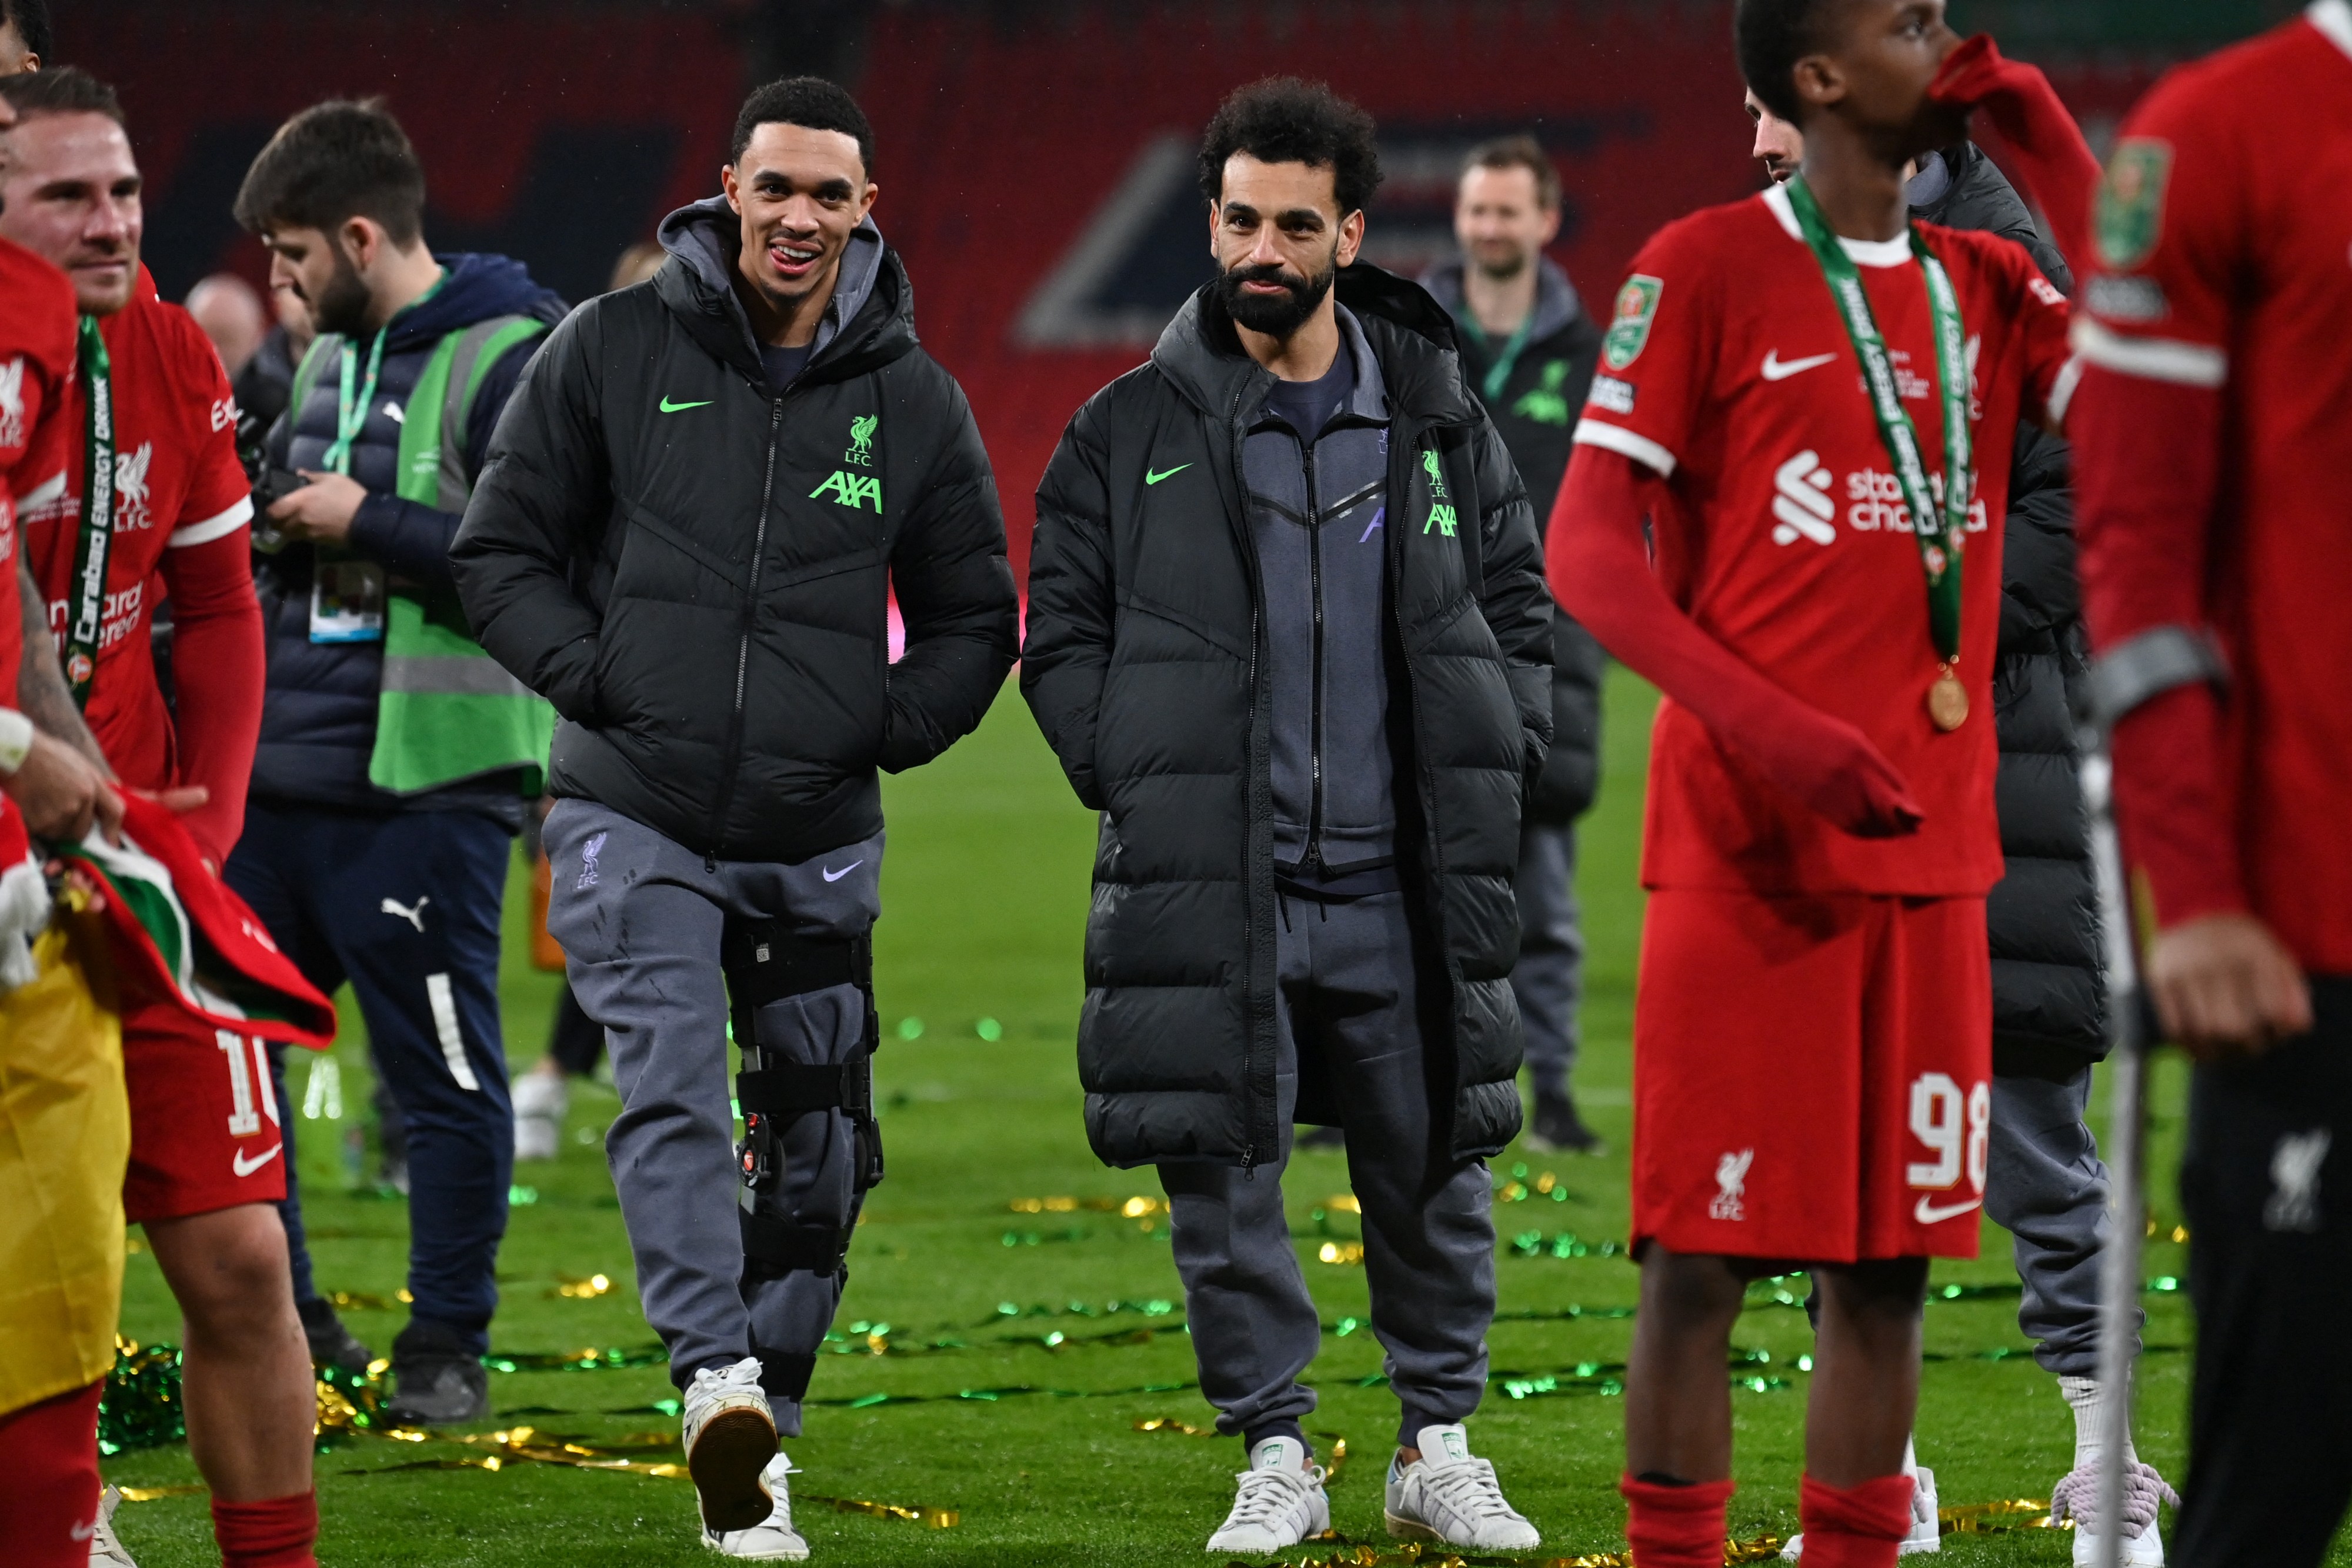 Mo Salah and Trent Alexander-Arnold missed Liverpool's Carabao Cup win through injury.